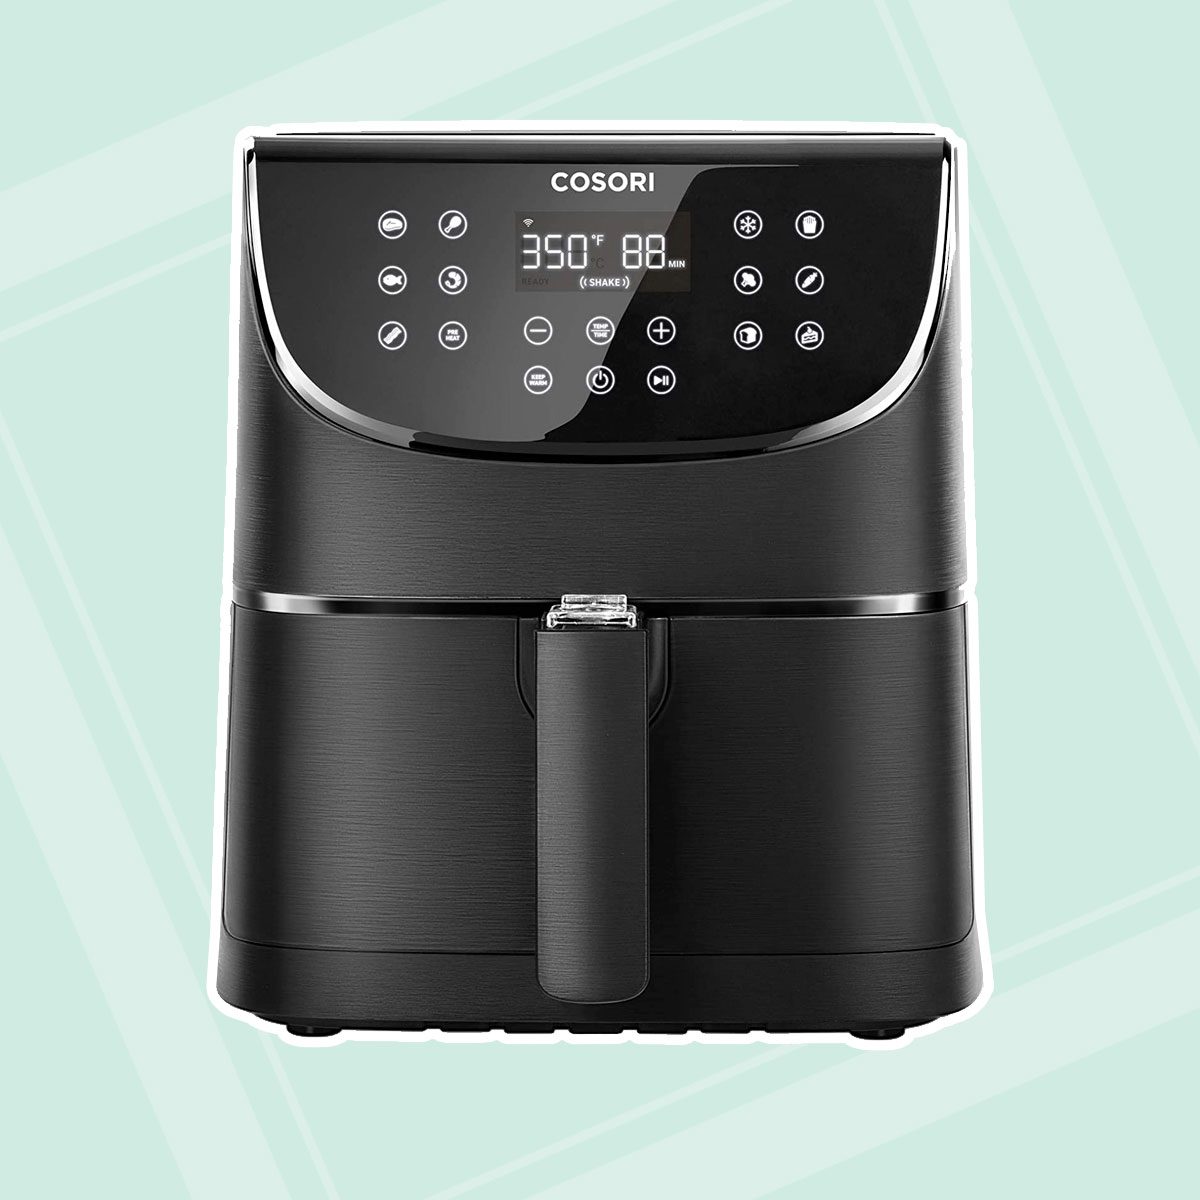 10 Smart kitchen gadgets to save you time and hassle » Gadget Flow